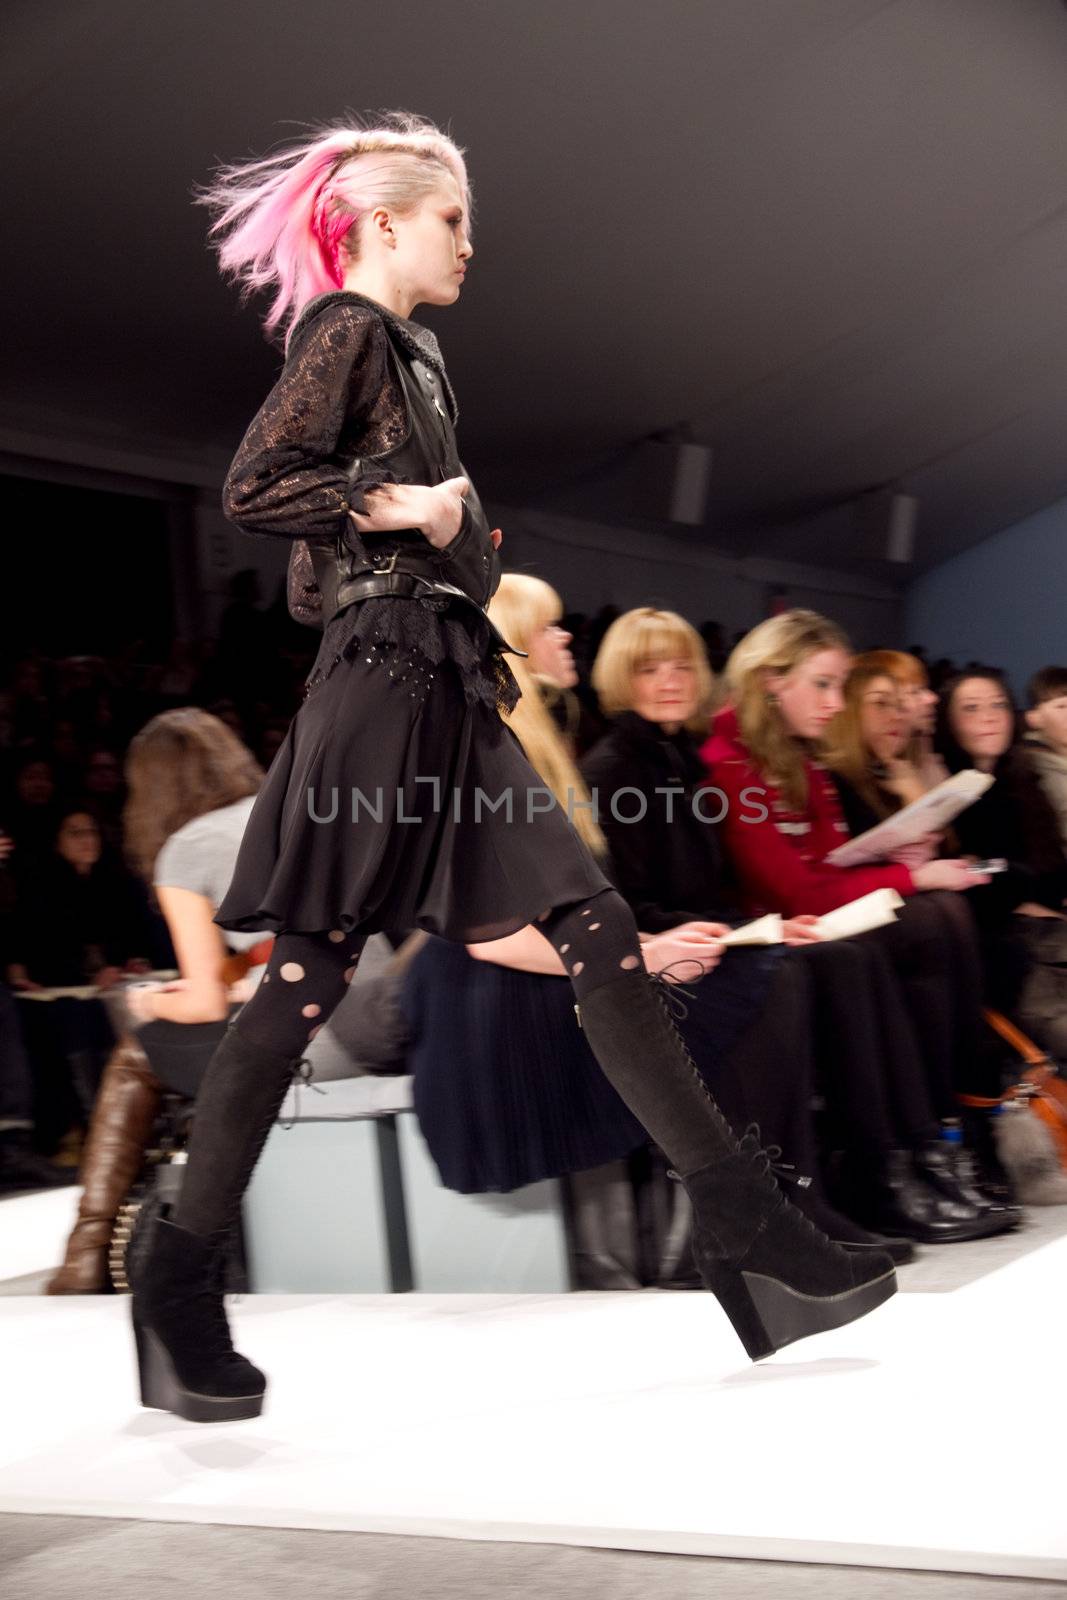 Charlotte Ronson Fall 2011 at New York Fashion Week at Lincoln Center by photopro